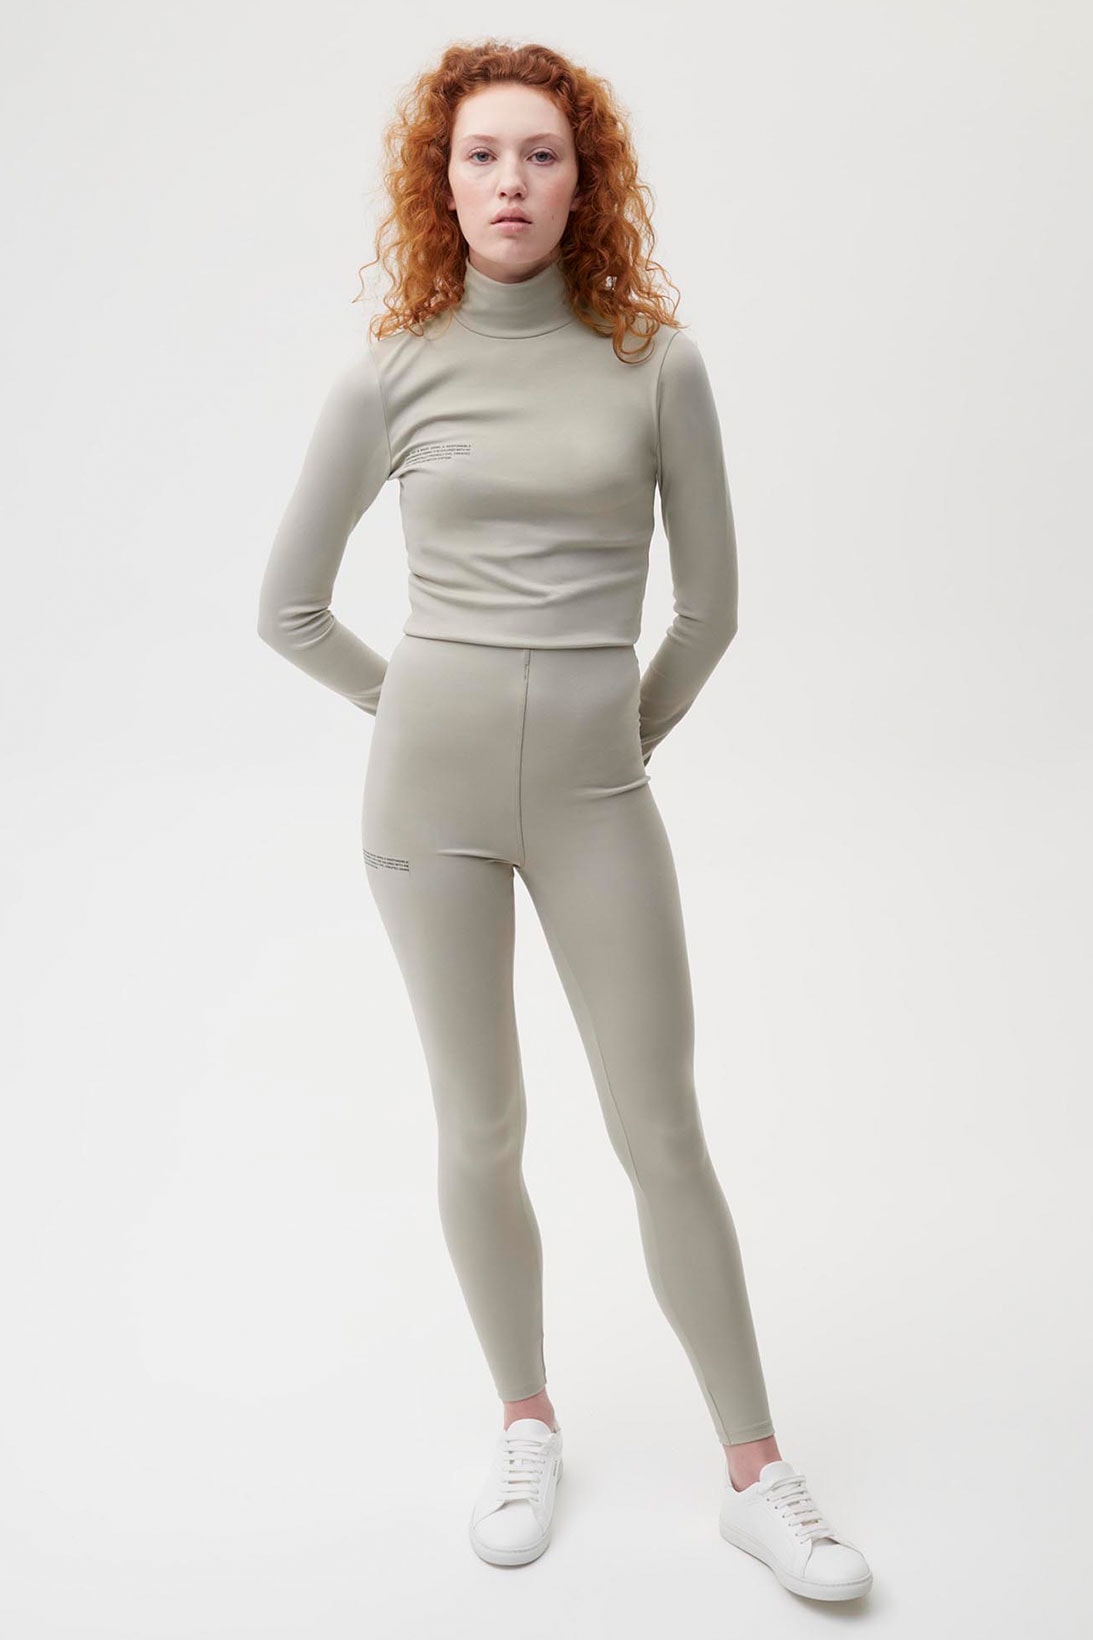 pangaia roica stretch athleisure sustainable collection turtleneck top leggings gray